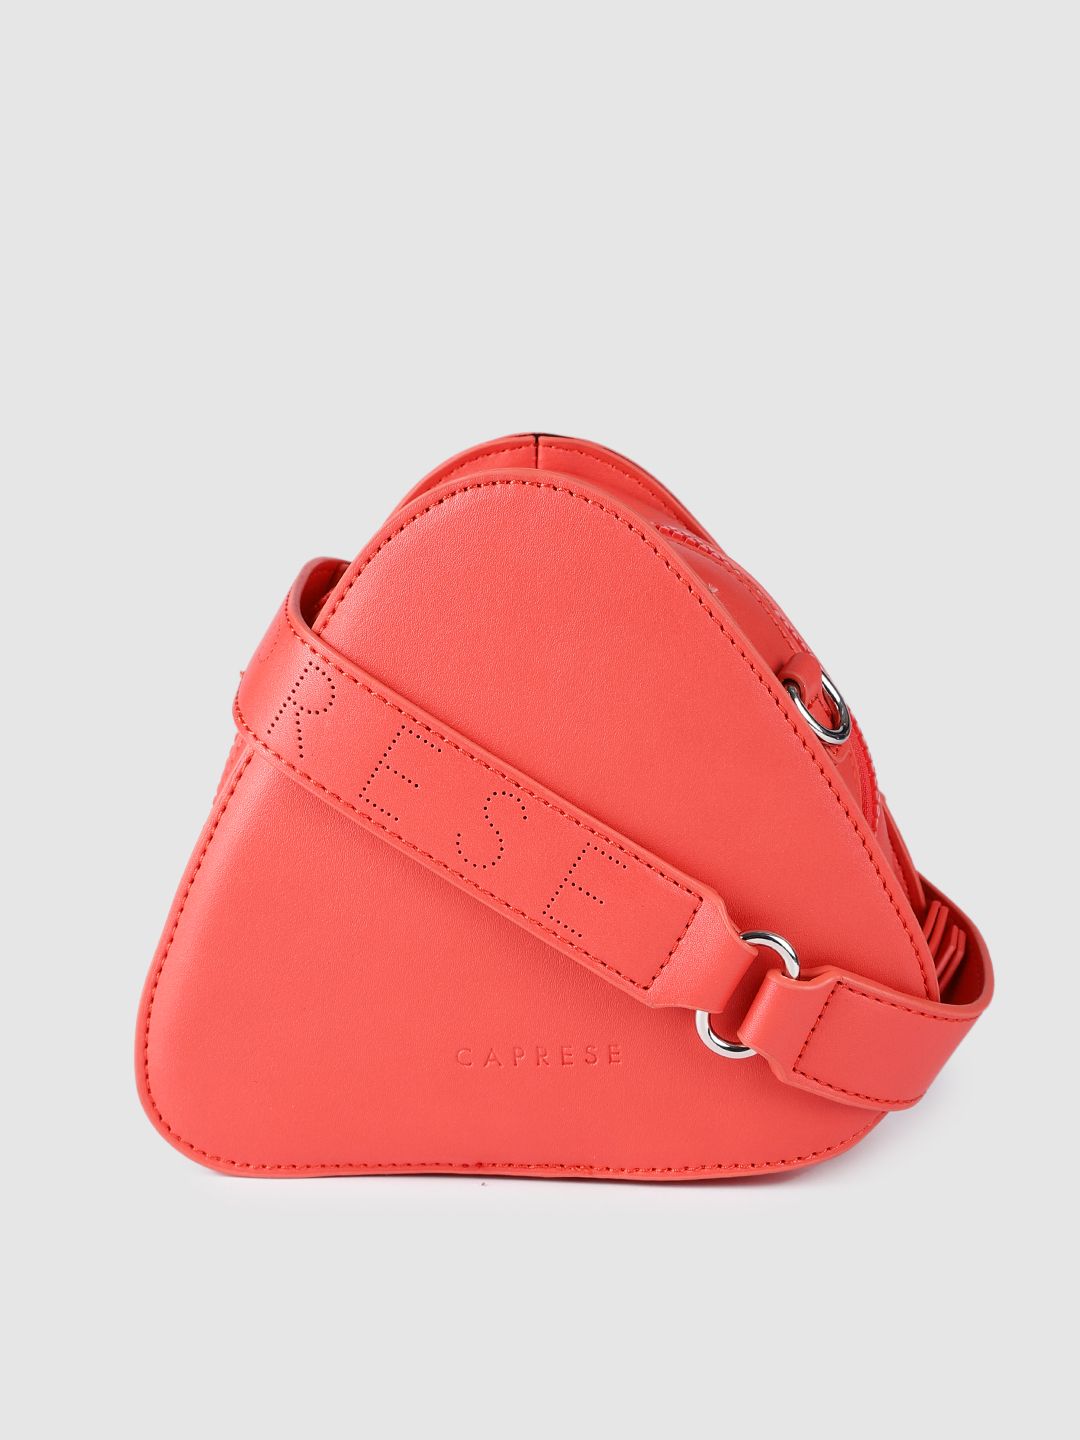 Caprese Coral Solid Structured Sling Bag Price in India